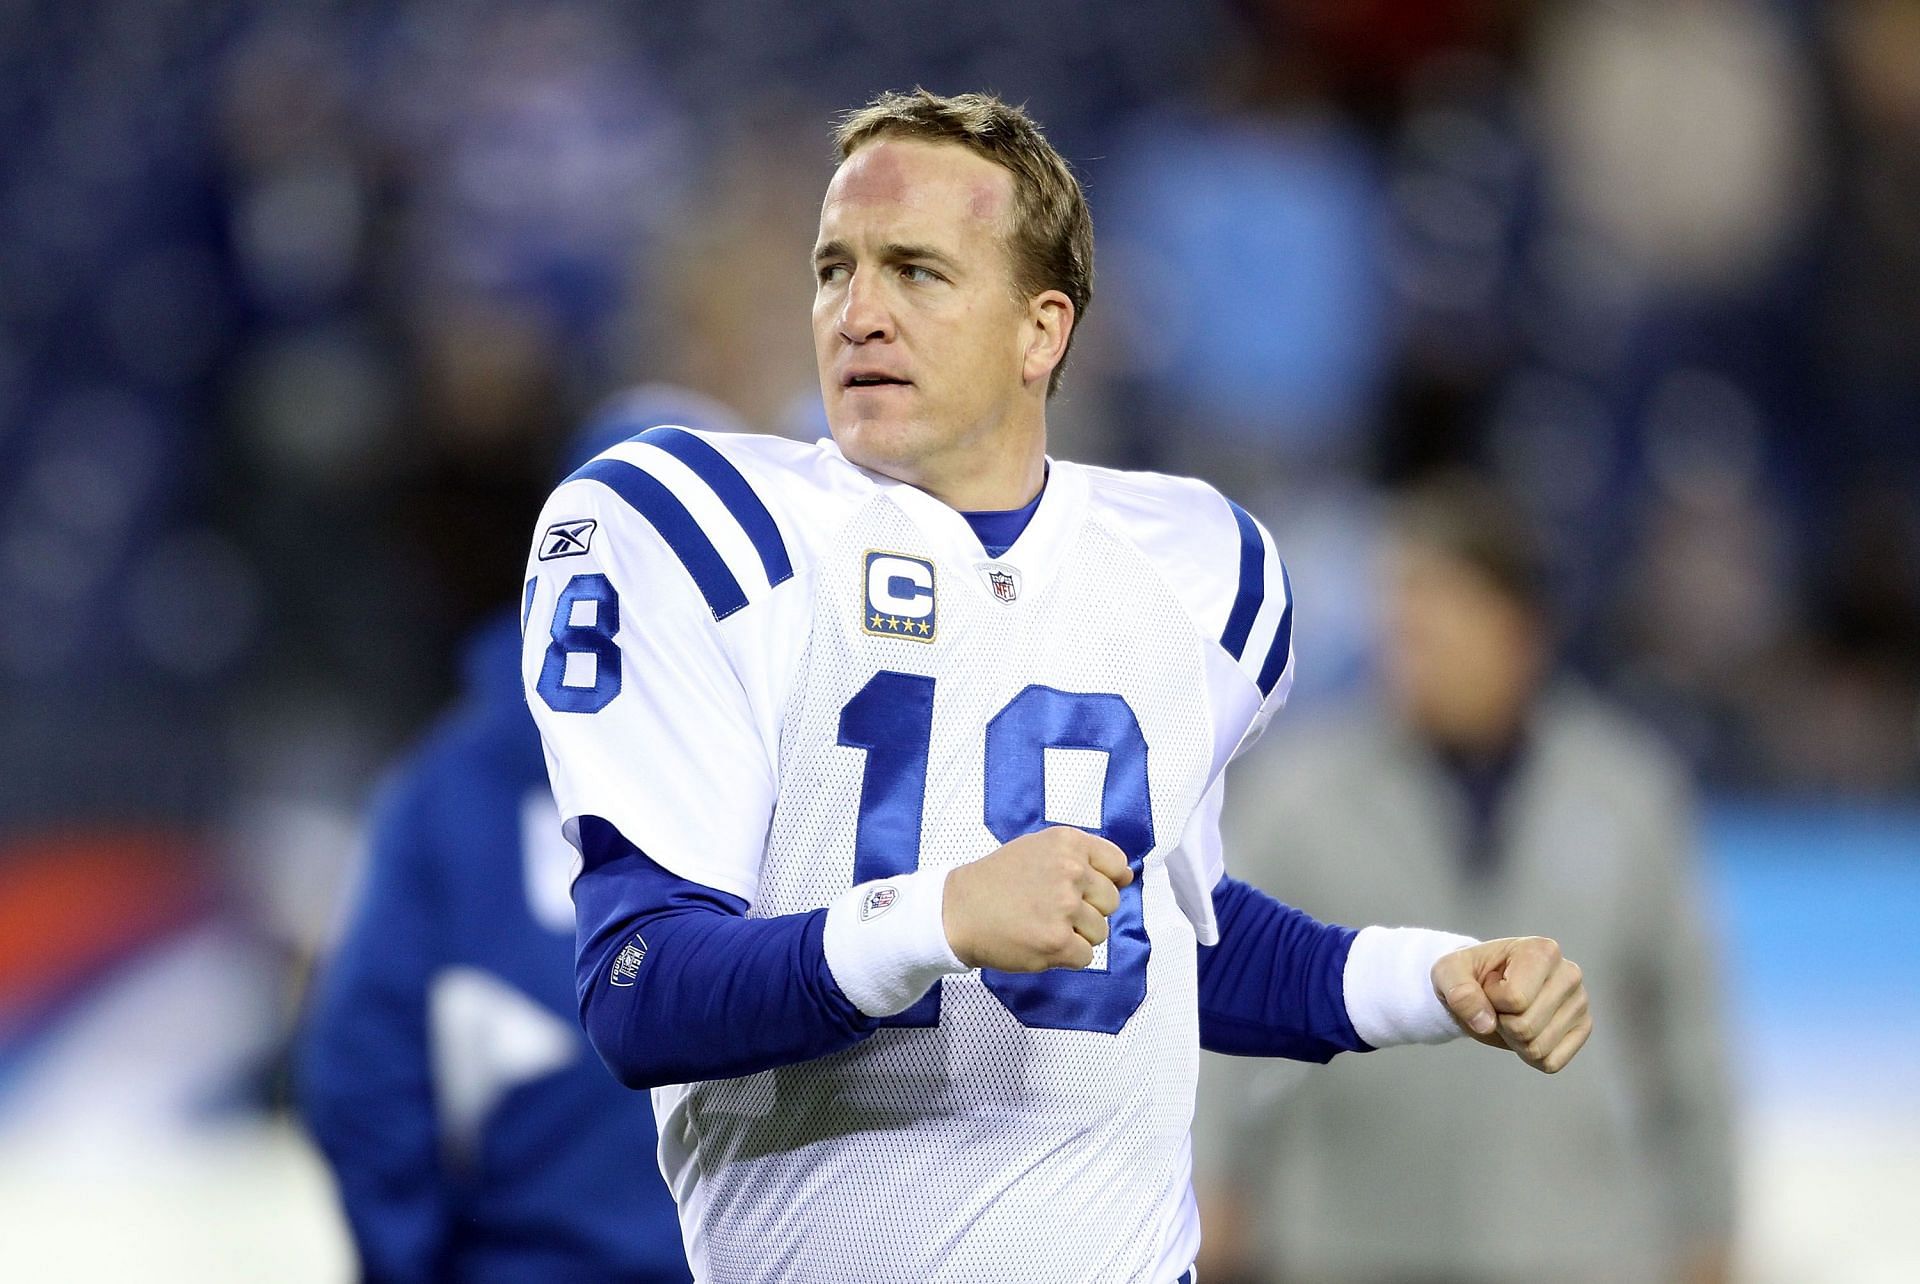 Peyton Manning played 14 seasons with the Indianapolis Colts - image via Getty